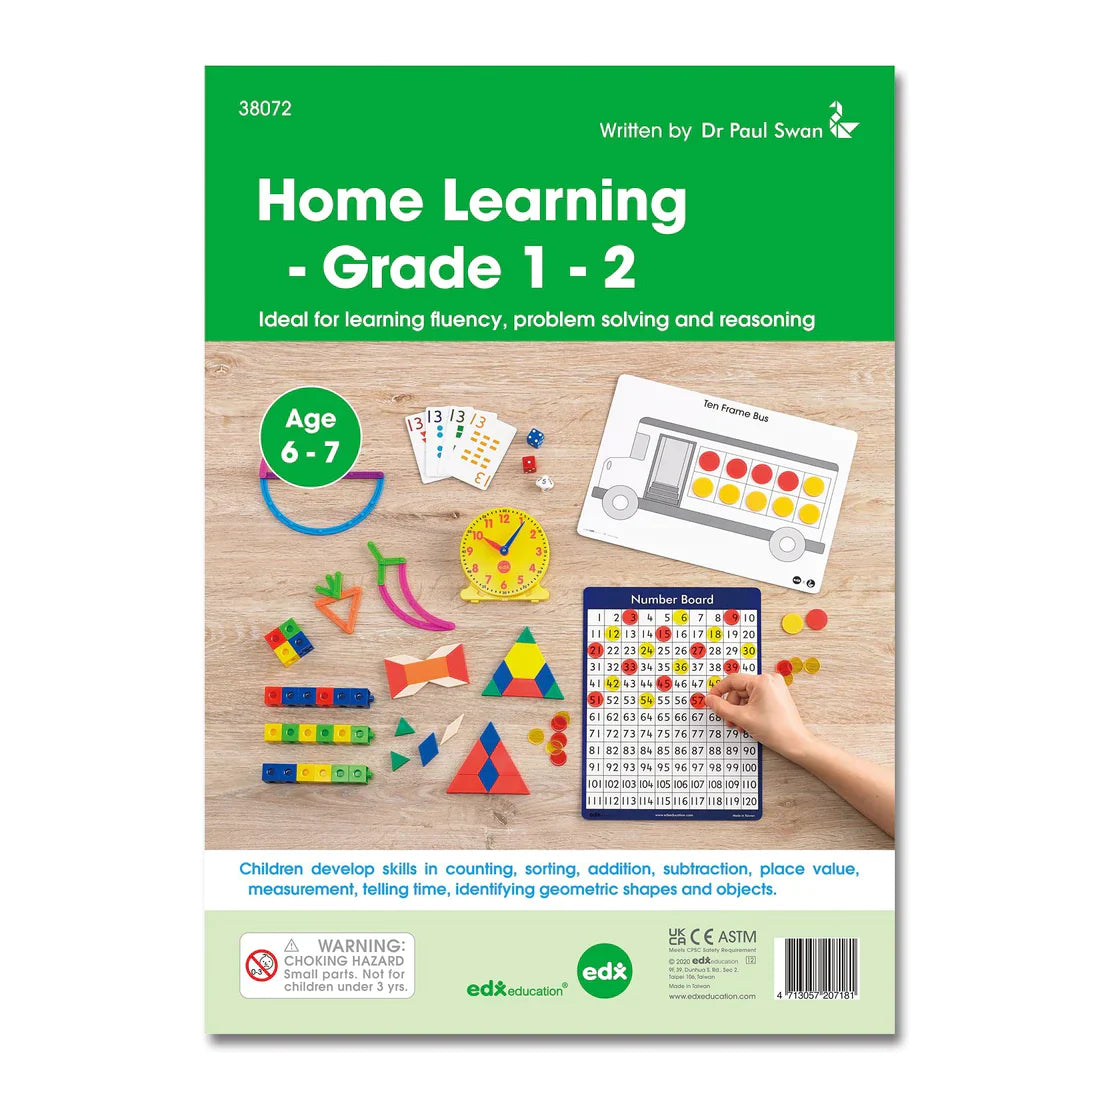 TickiT: Math Home Learning kit 6-7 years old